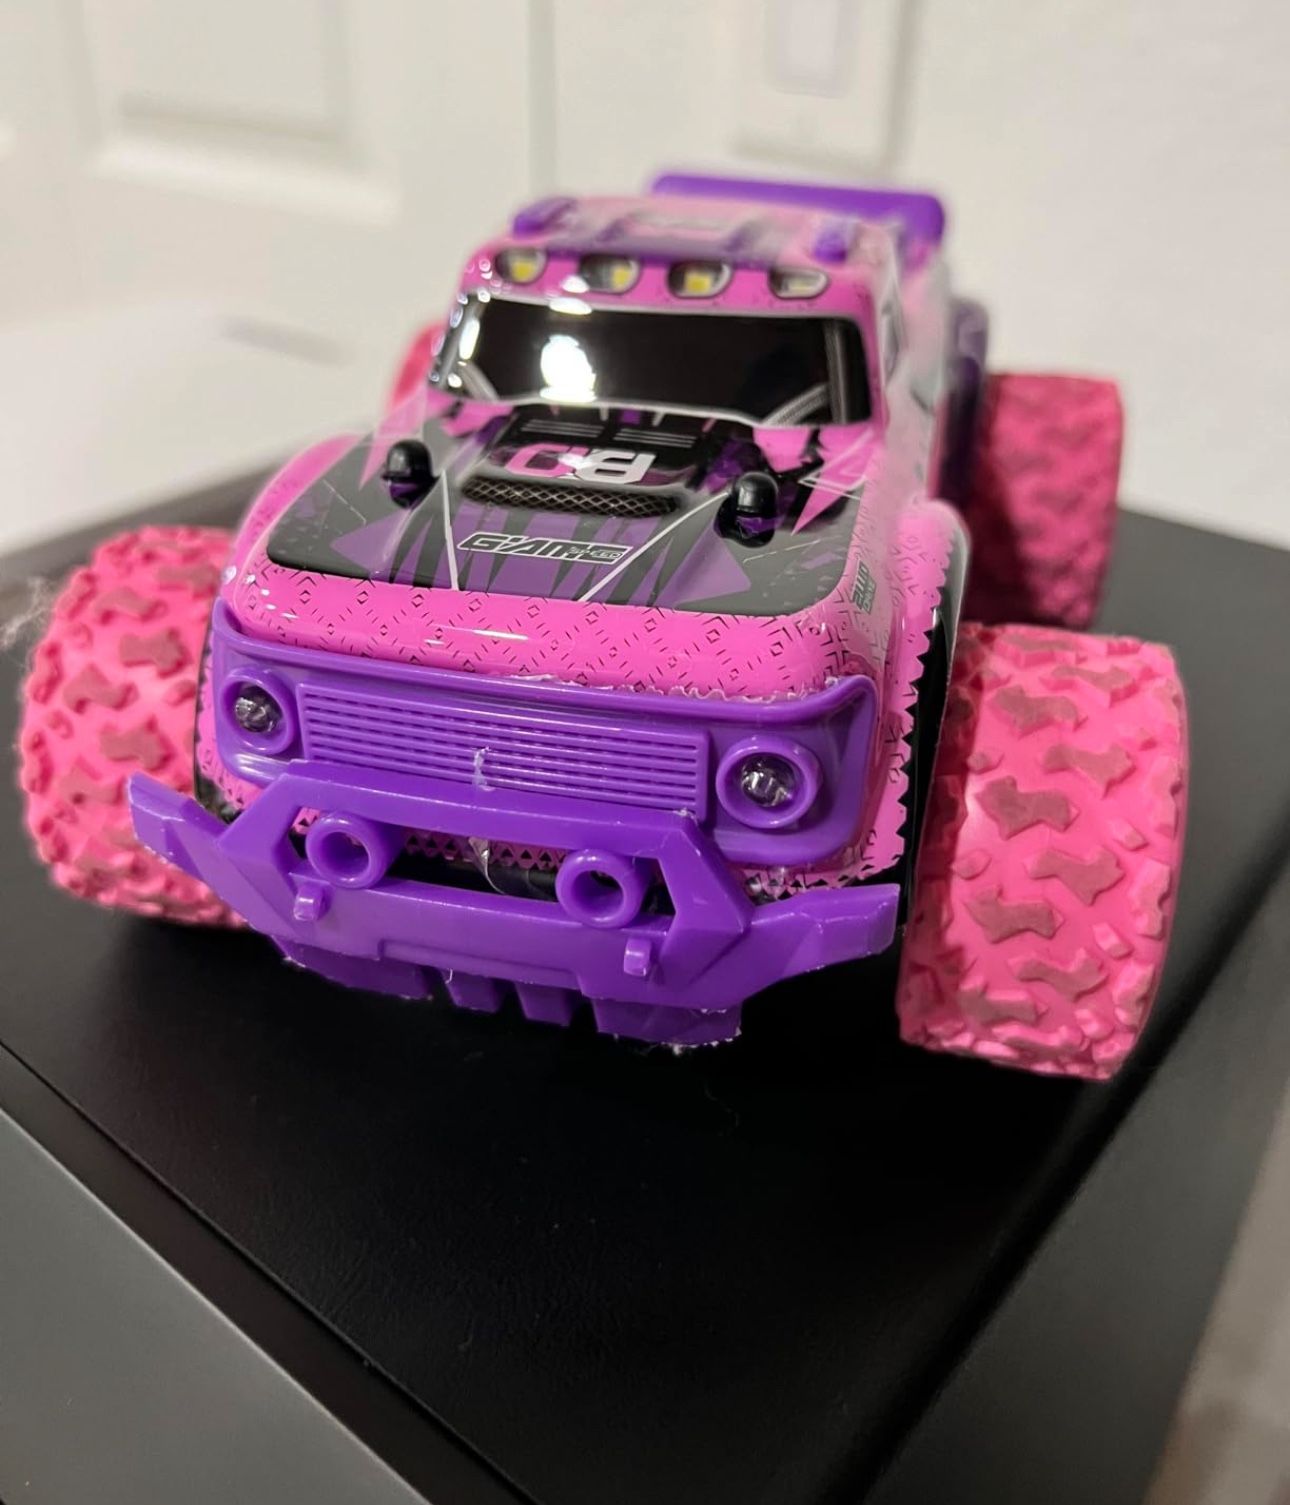 Remote Control Car, RC Car, Monster Truck Toy-High-Speed 2.4GHz Off-Road Racing Cars for Girls, Kids and Adults, Purple Pink Control car with LED Ligh